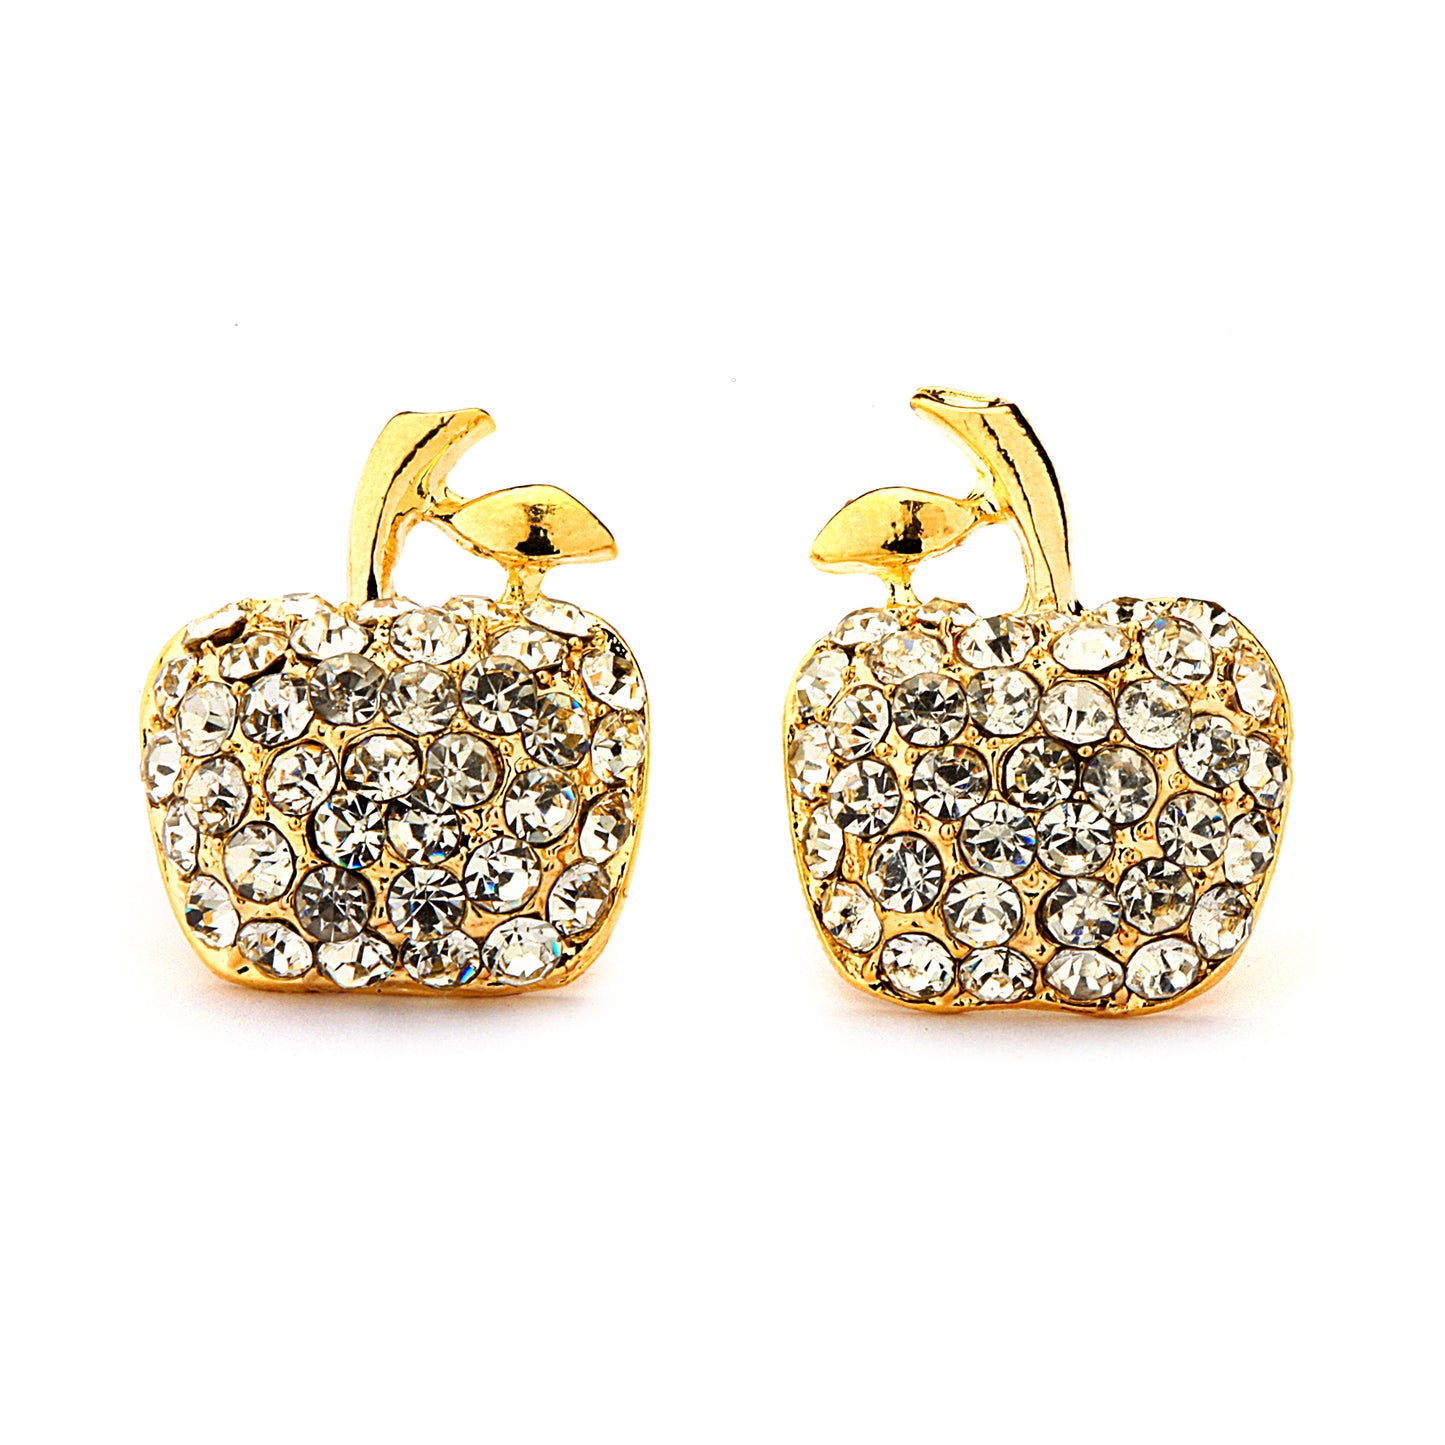 Pave CZ Apple Earrings 14-kt Gold Filled